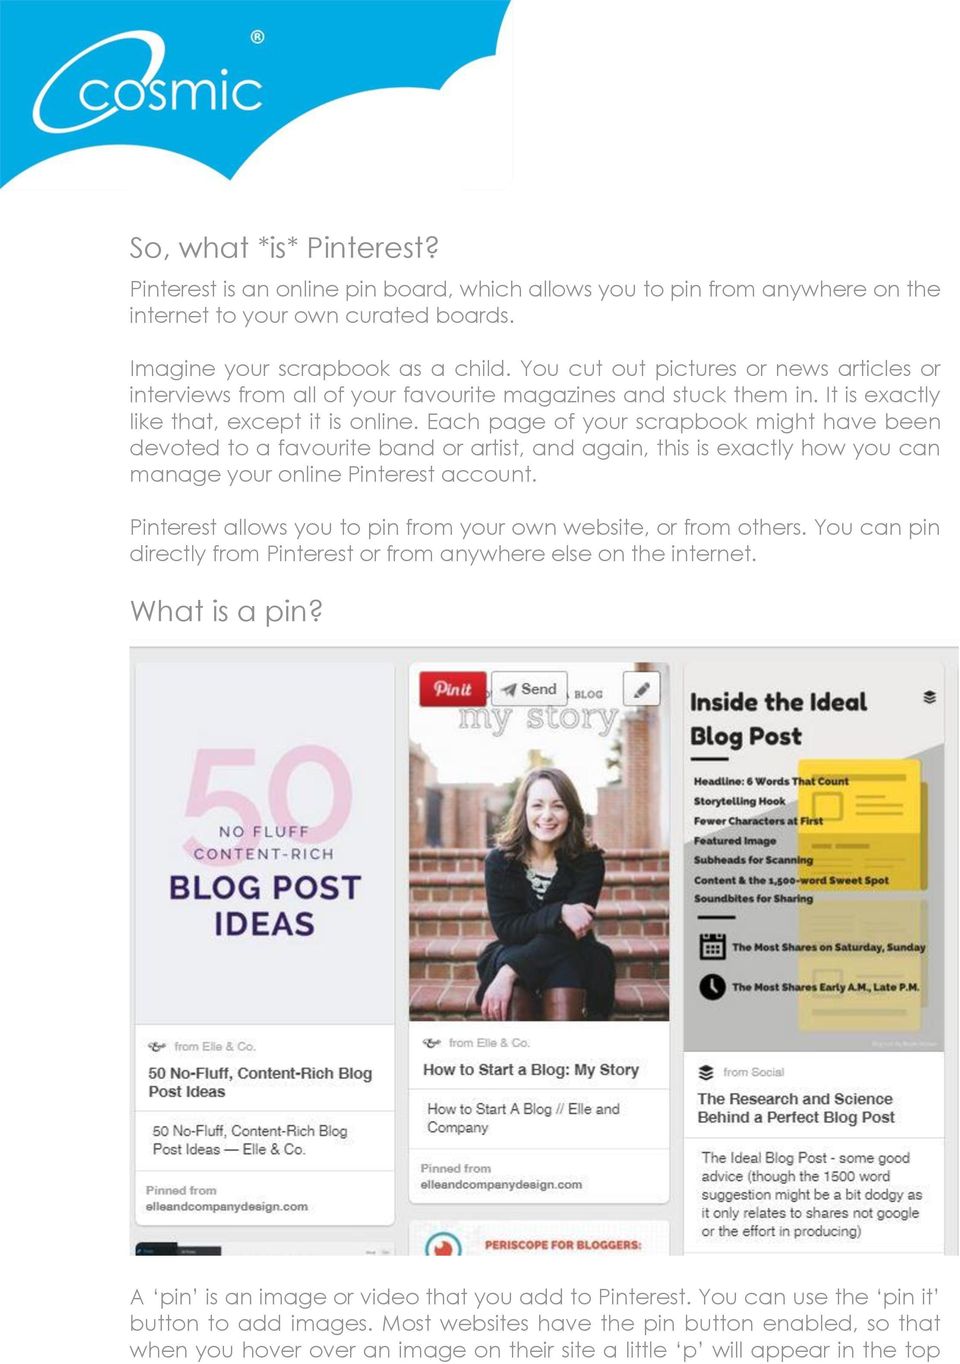 Each page of your scrapbook might have been devoted to a favourite band or artist, and again, this is exactly how you can manage your online Pinterest account.